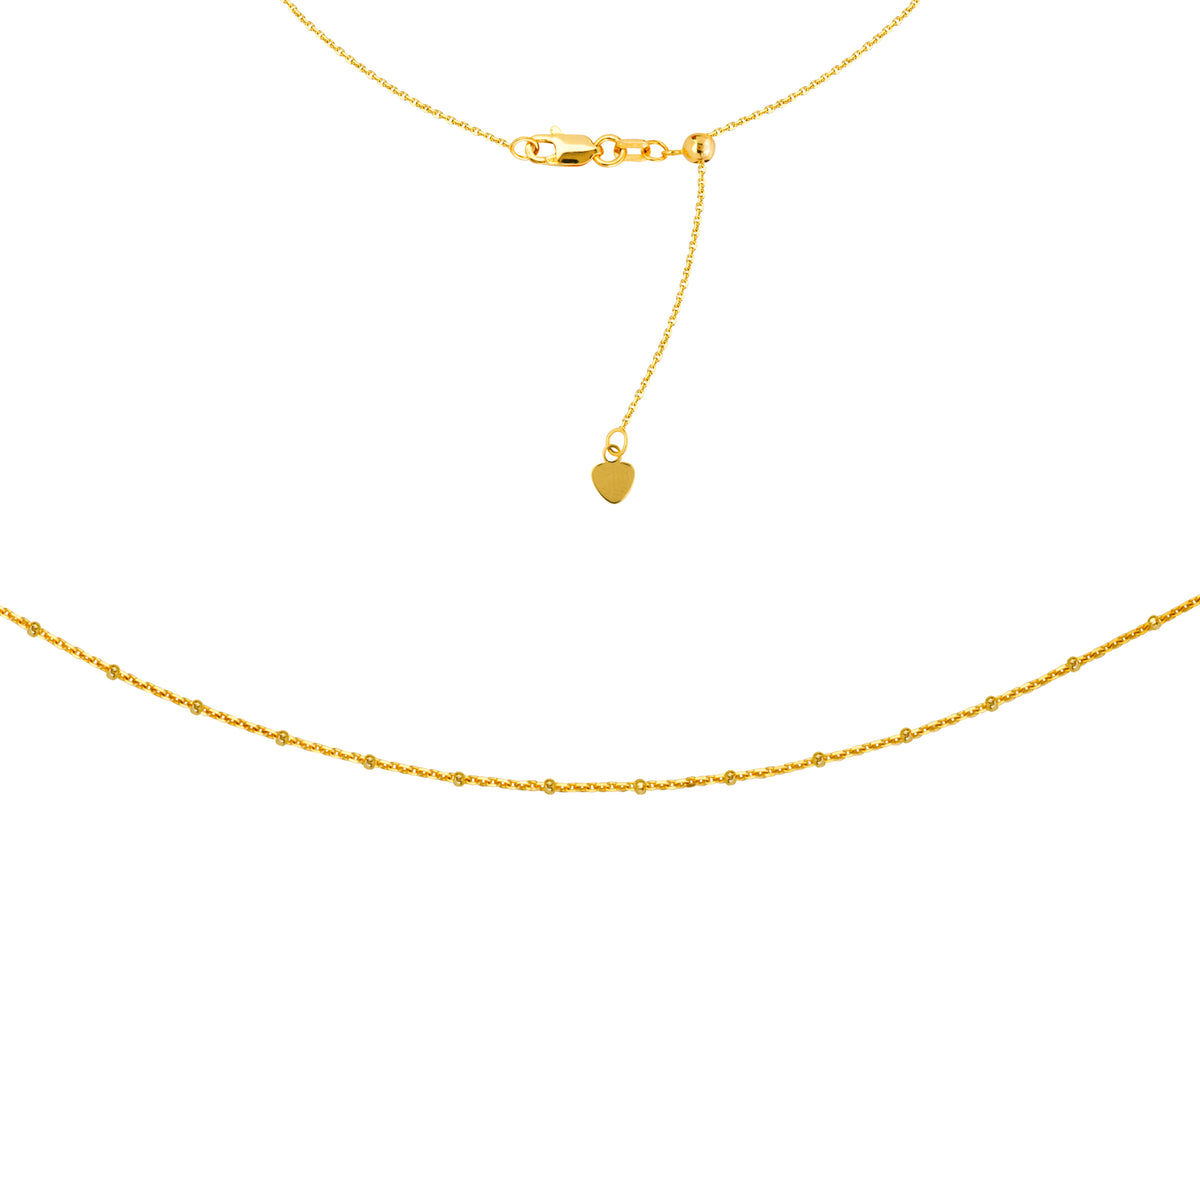 Saturn Chain Choker 14k Yellow Gold Necklace, 16" Adjustable fine designer jewelry for men and women